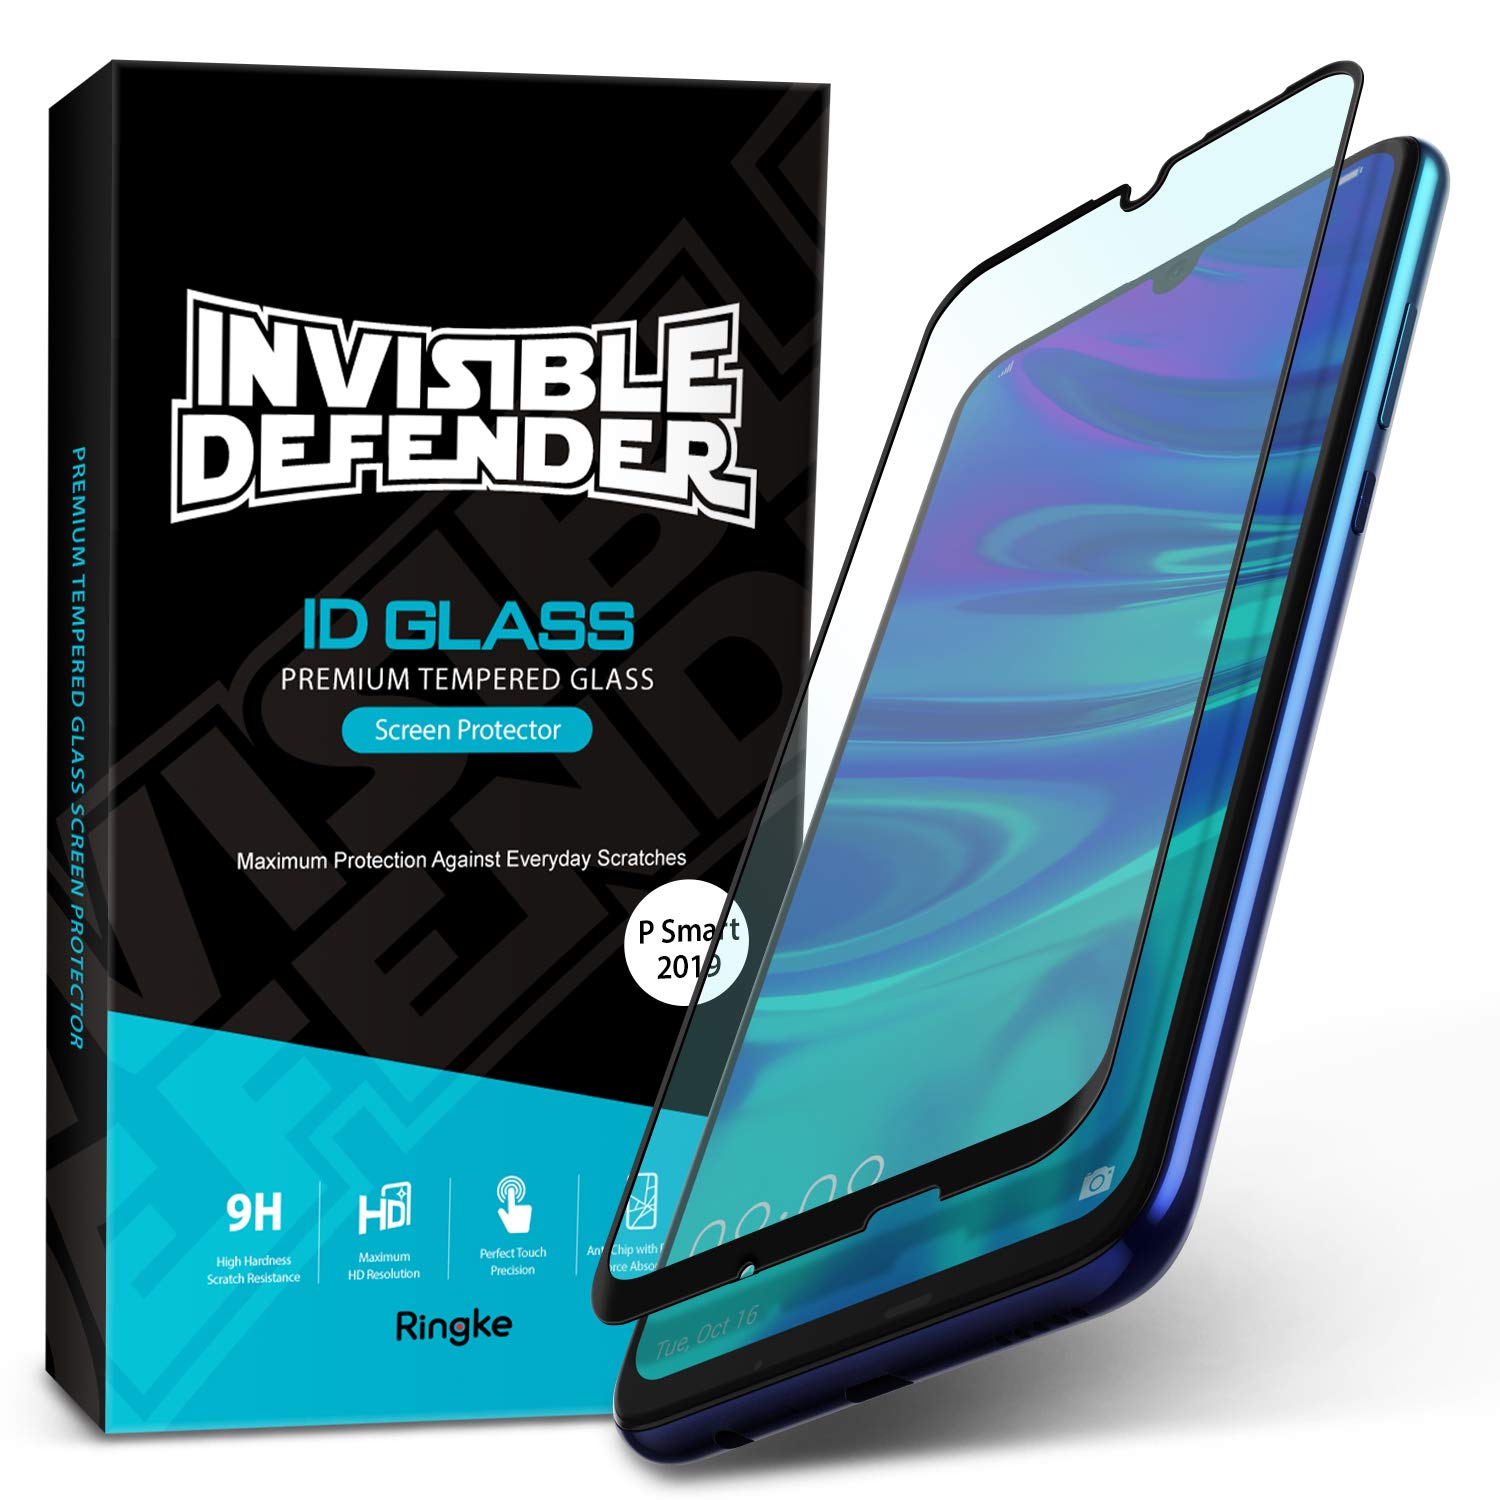 huawei p smart 2019 invisible defender glass full coverage screen protector